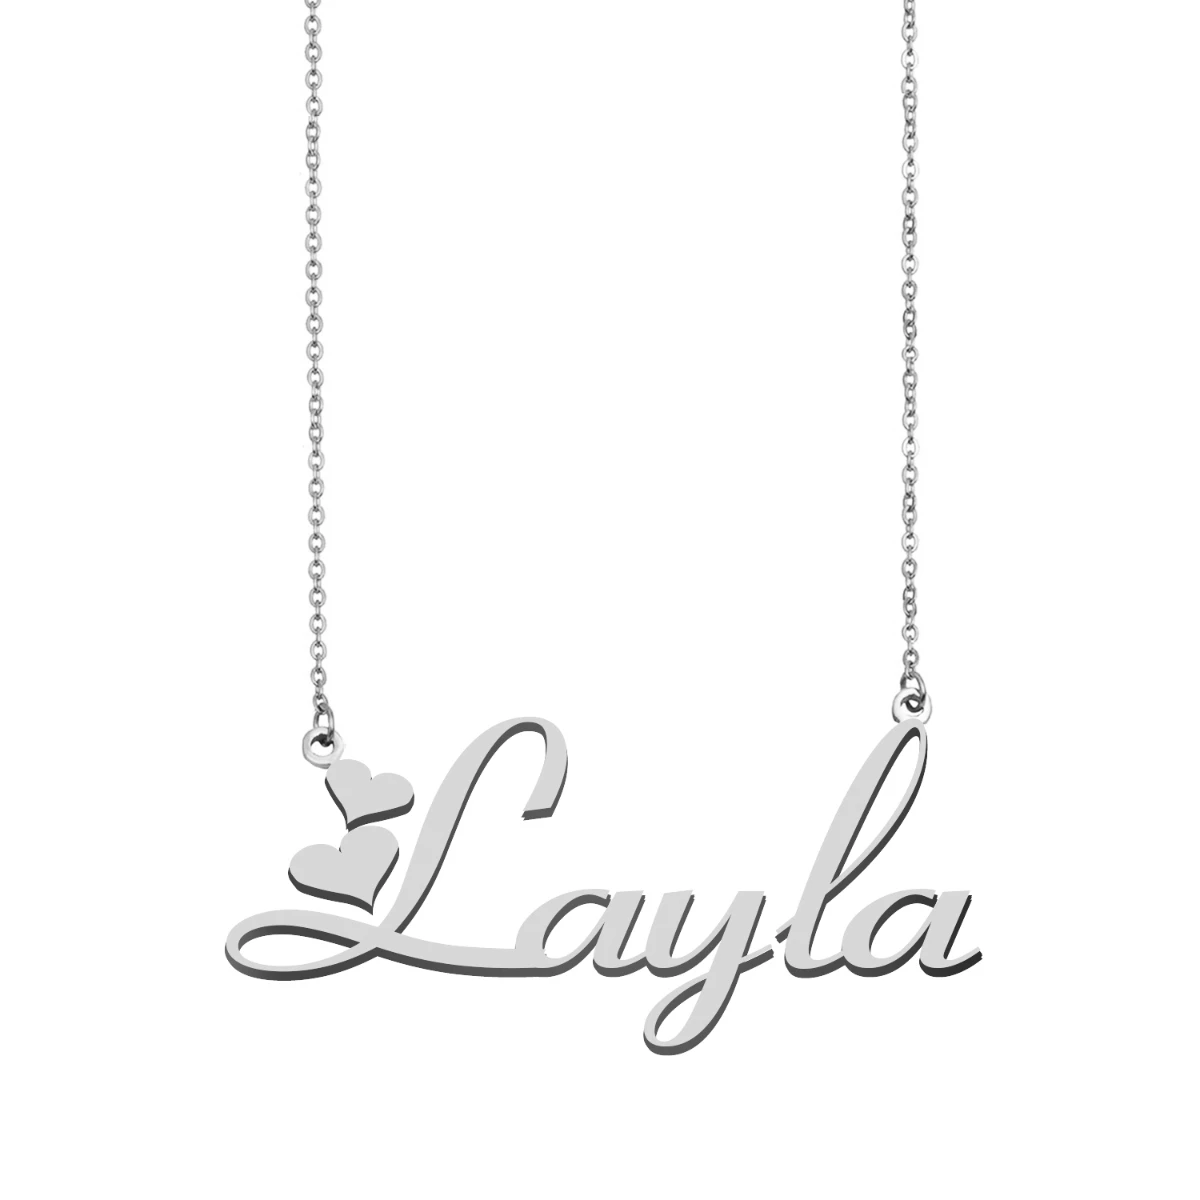 Name Necklace Layla Personalised Stainless Steel Gold for Women Choker Alphabet Letter Pendant Girls Mom Jewelry Gift